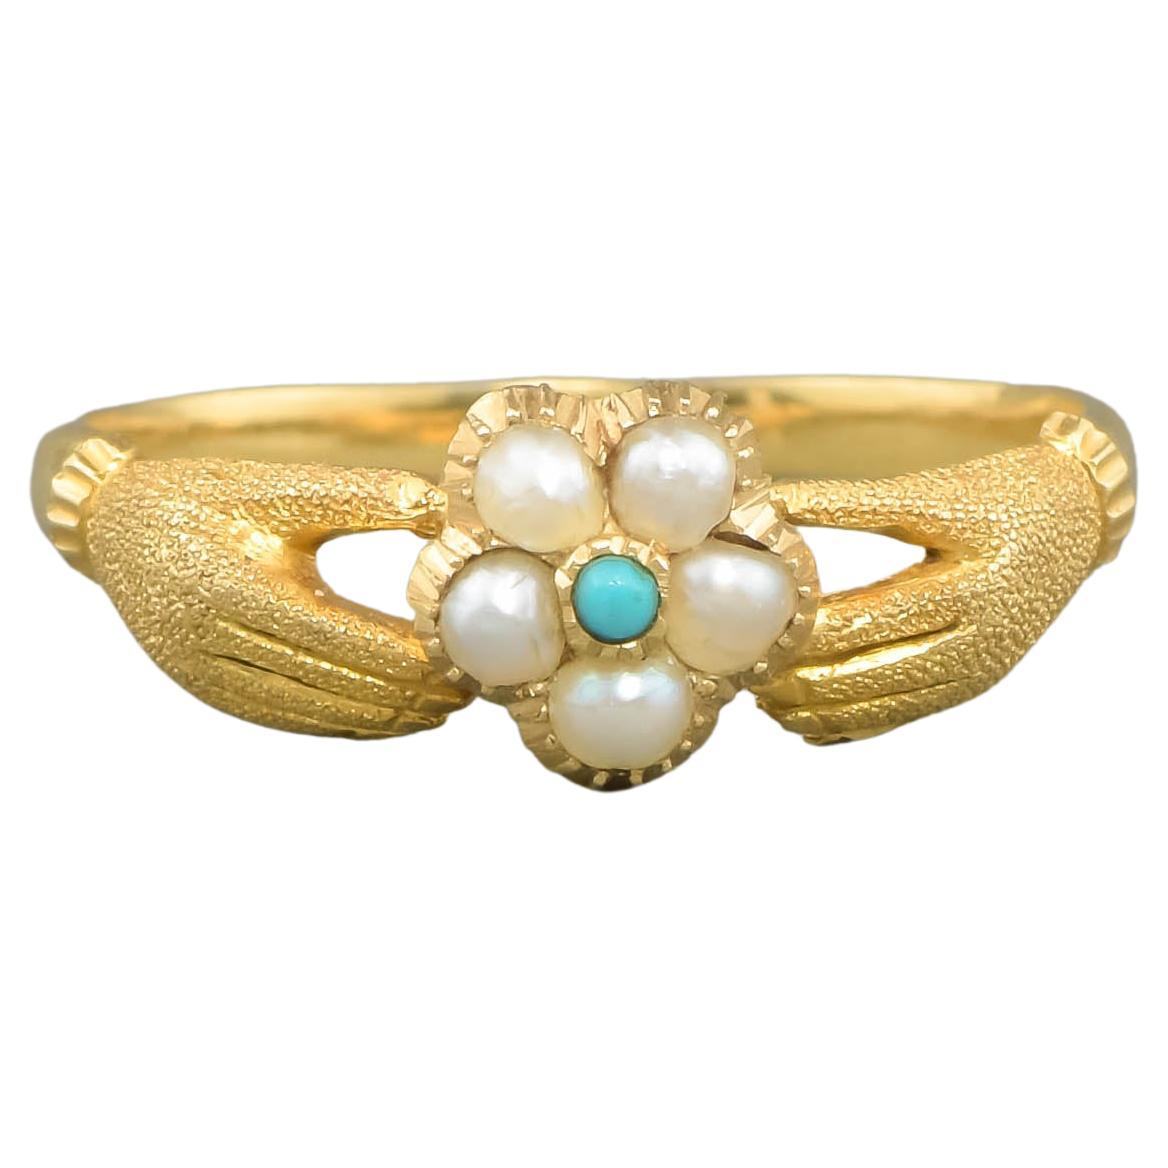 Georgian 14k Gold Fede Ring with Locket Compartment & Pearl & Turquoise Flower